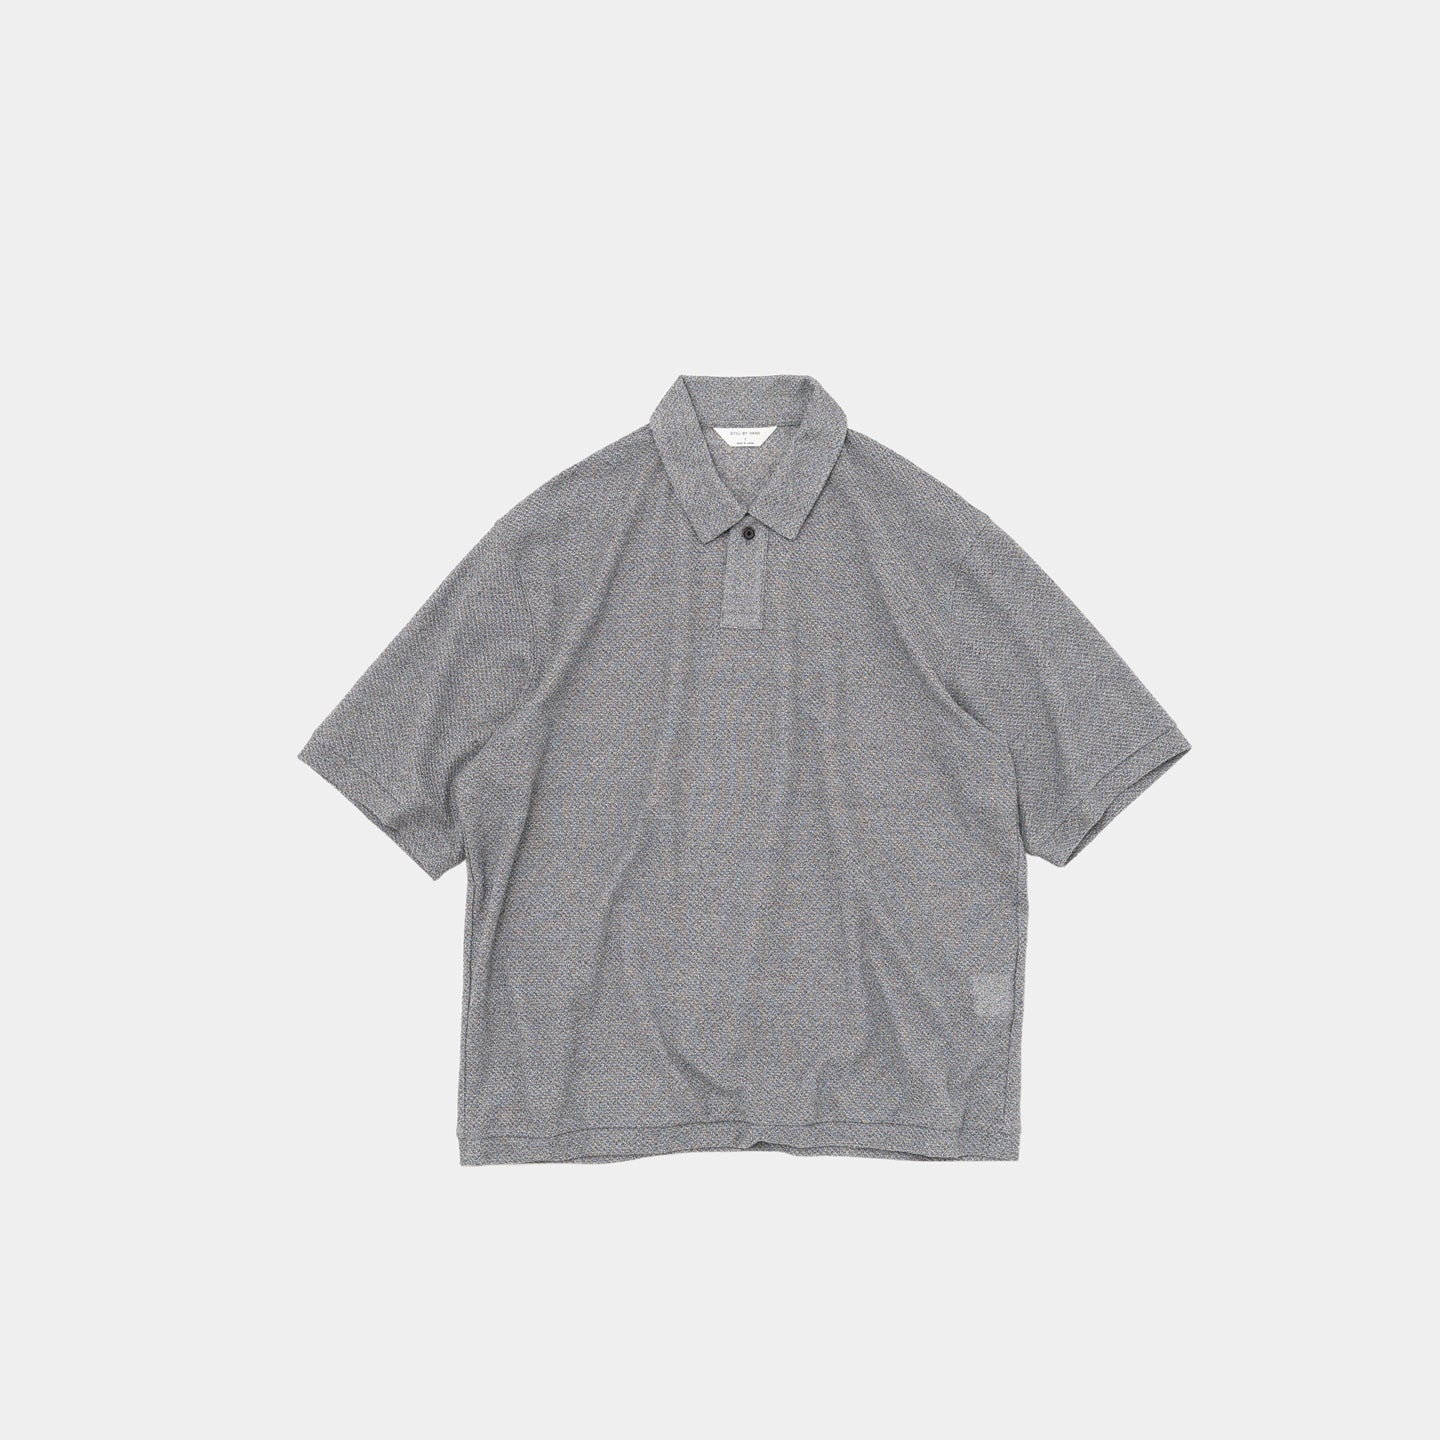 STILL BY HAND  Moss Stitch Polo Shirt LEO BOUTIQUE